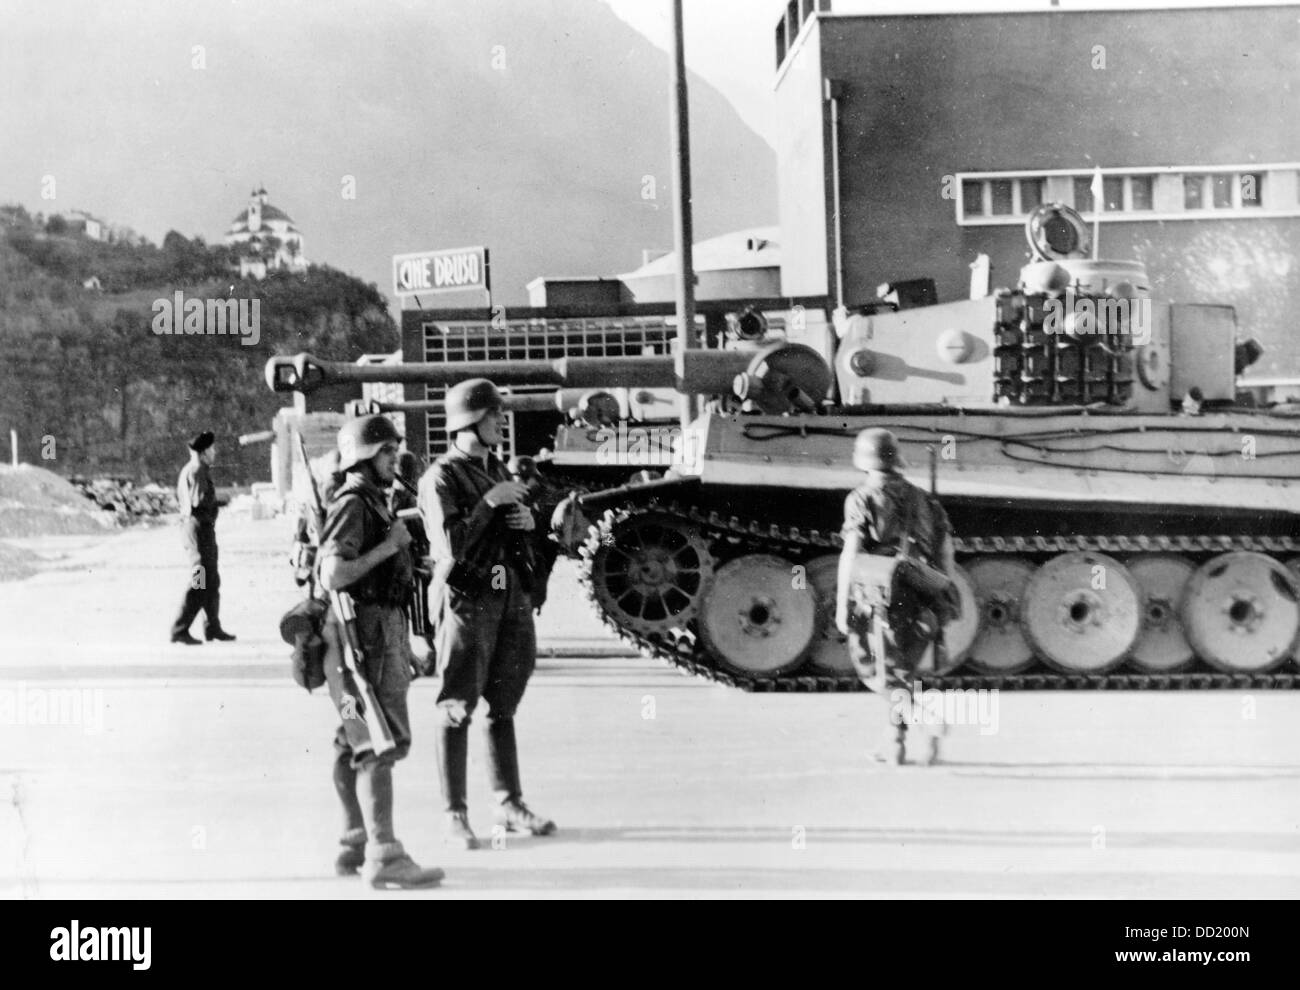 The image from the Nazi Propaganda! shows a tank of the type "Tiger" produced by Henschel & Son during the occupation of Bozen, Italy, in the fight against the Badoglio government in September 1943. Fotoarchiv für Zeitgeschichte Stock Photo